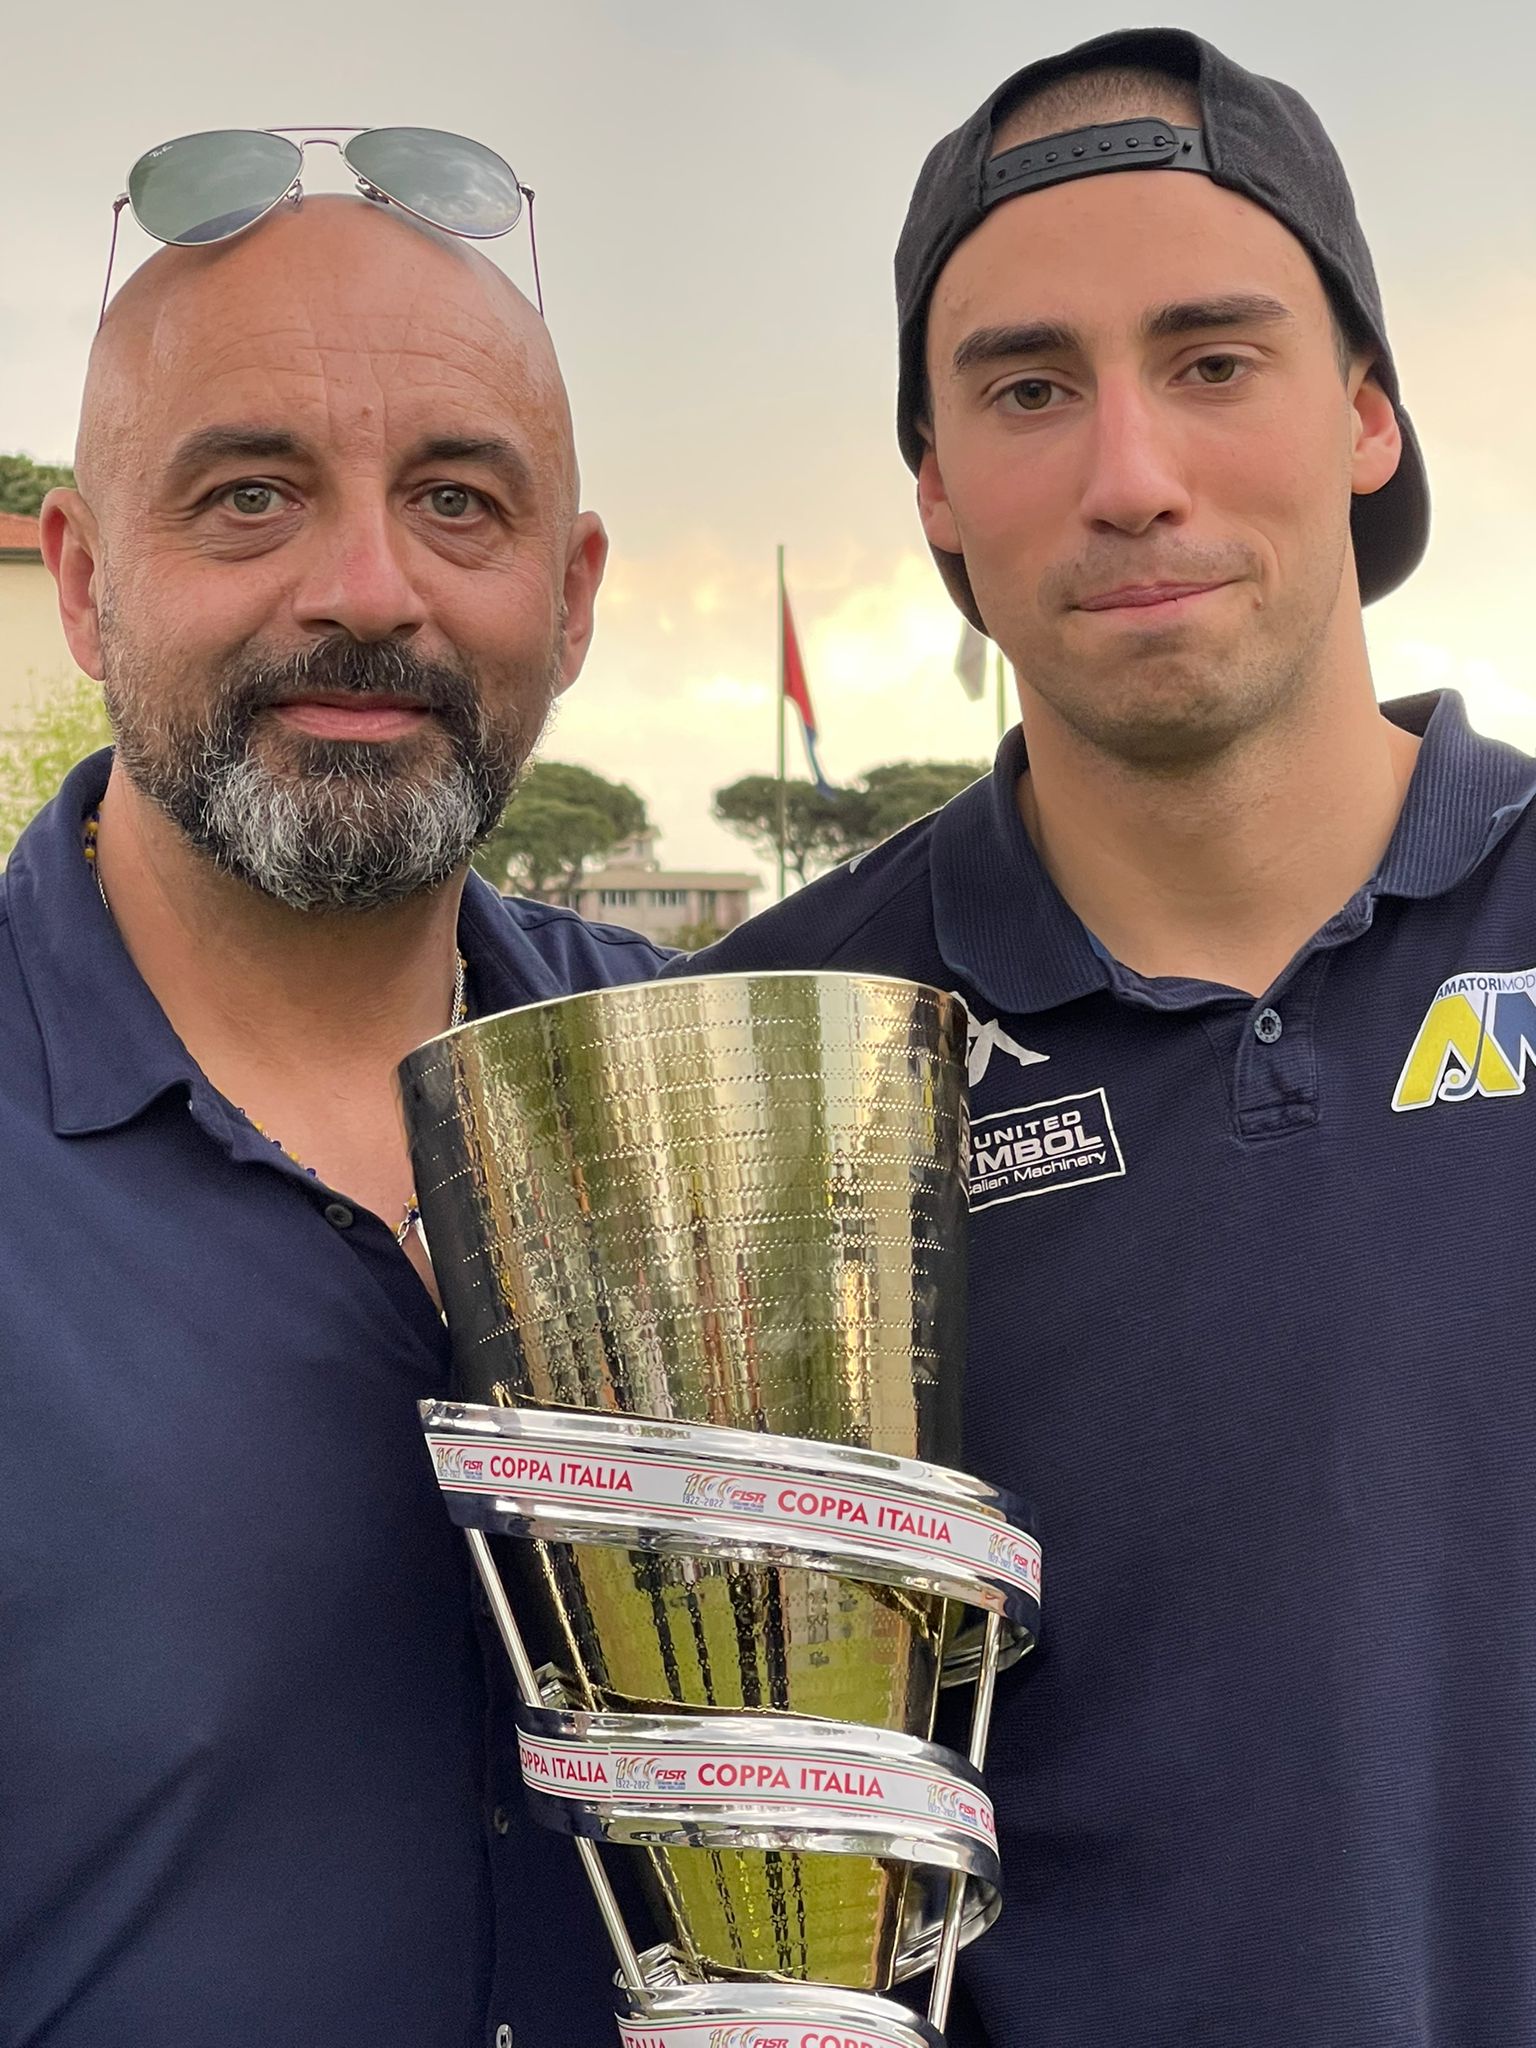 Hockey – Symbol Amatori Modena 1945, Luca Moncalieri: “The CAF ruling shows that there was no aggression on my part, but who is going to give me back a month that I don’t want anyone?”